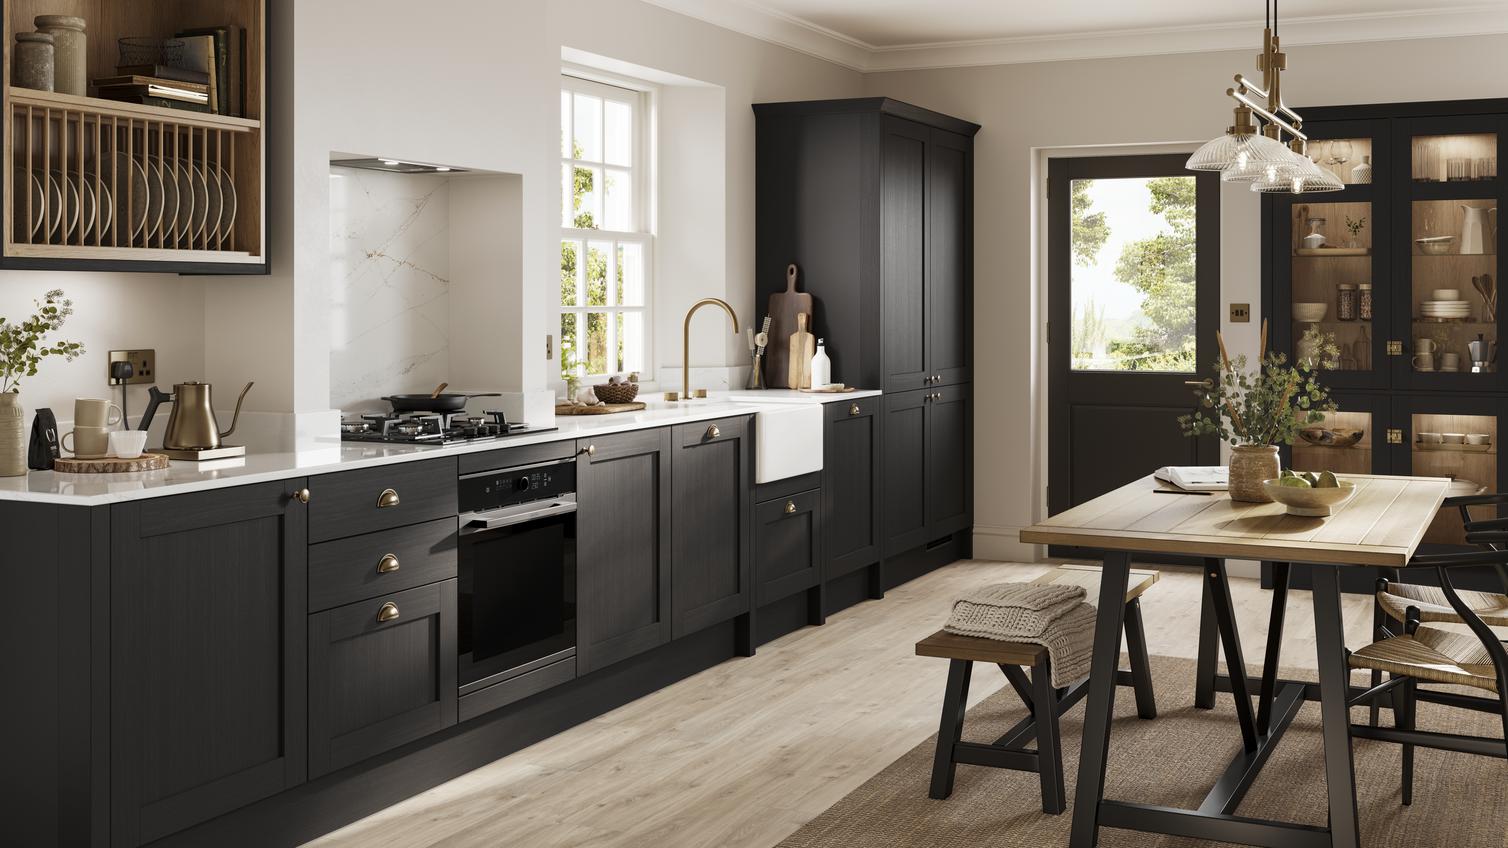 Black, charcoal-coloured shaker kitchen from the Halesworth range. In a single wall layout with hob, oven and glass cabinets